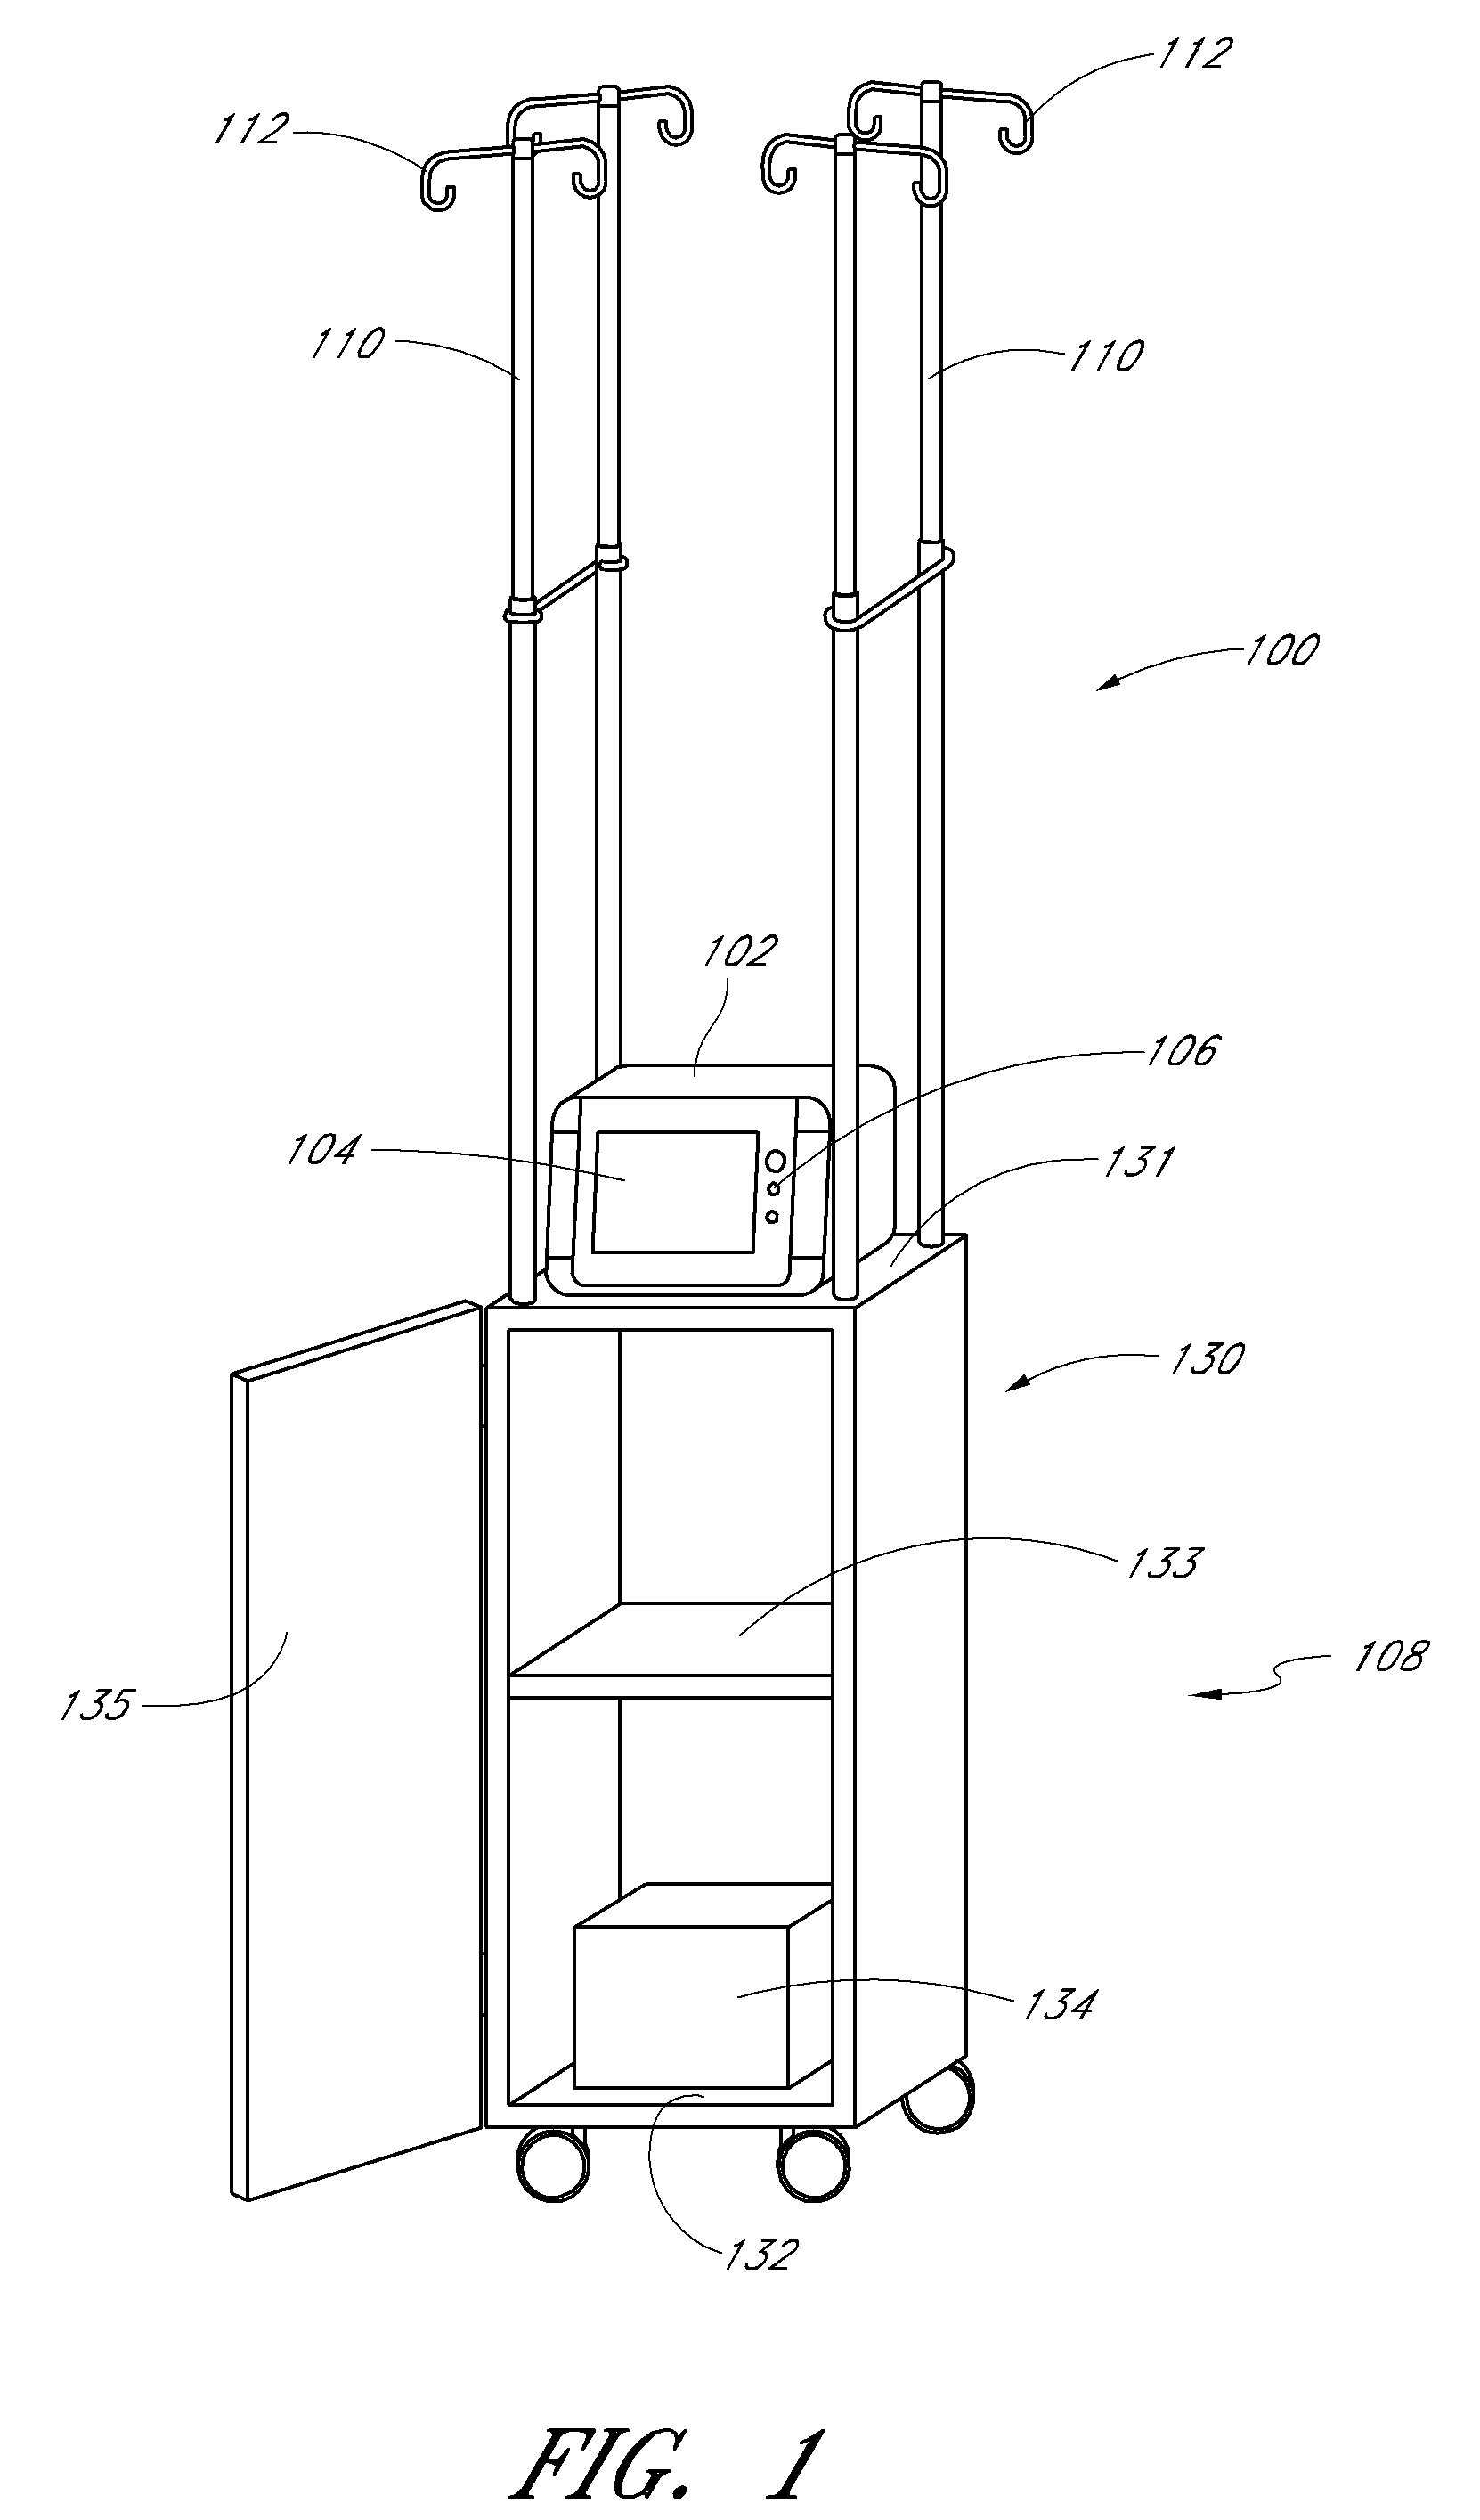 Systems and methods for verification of sample integrity